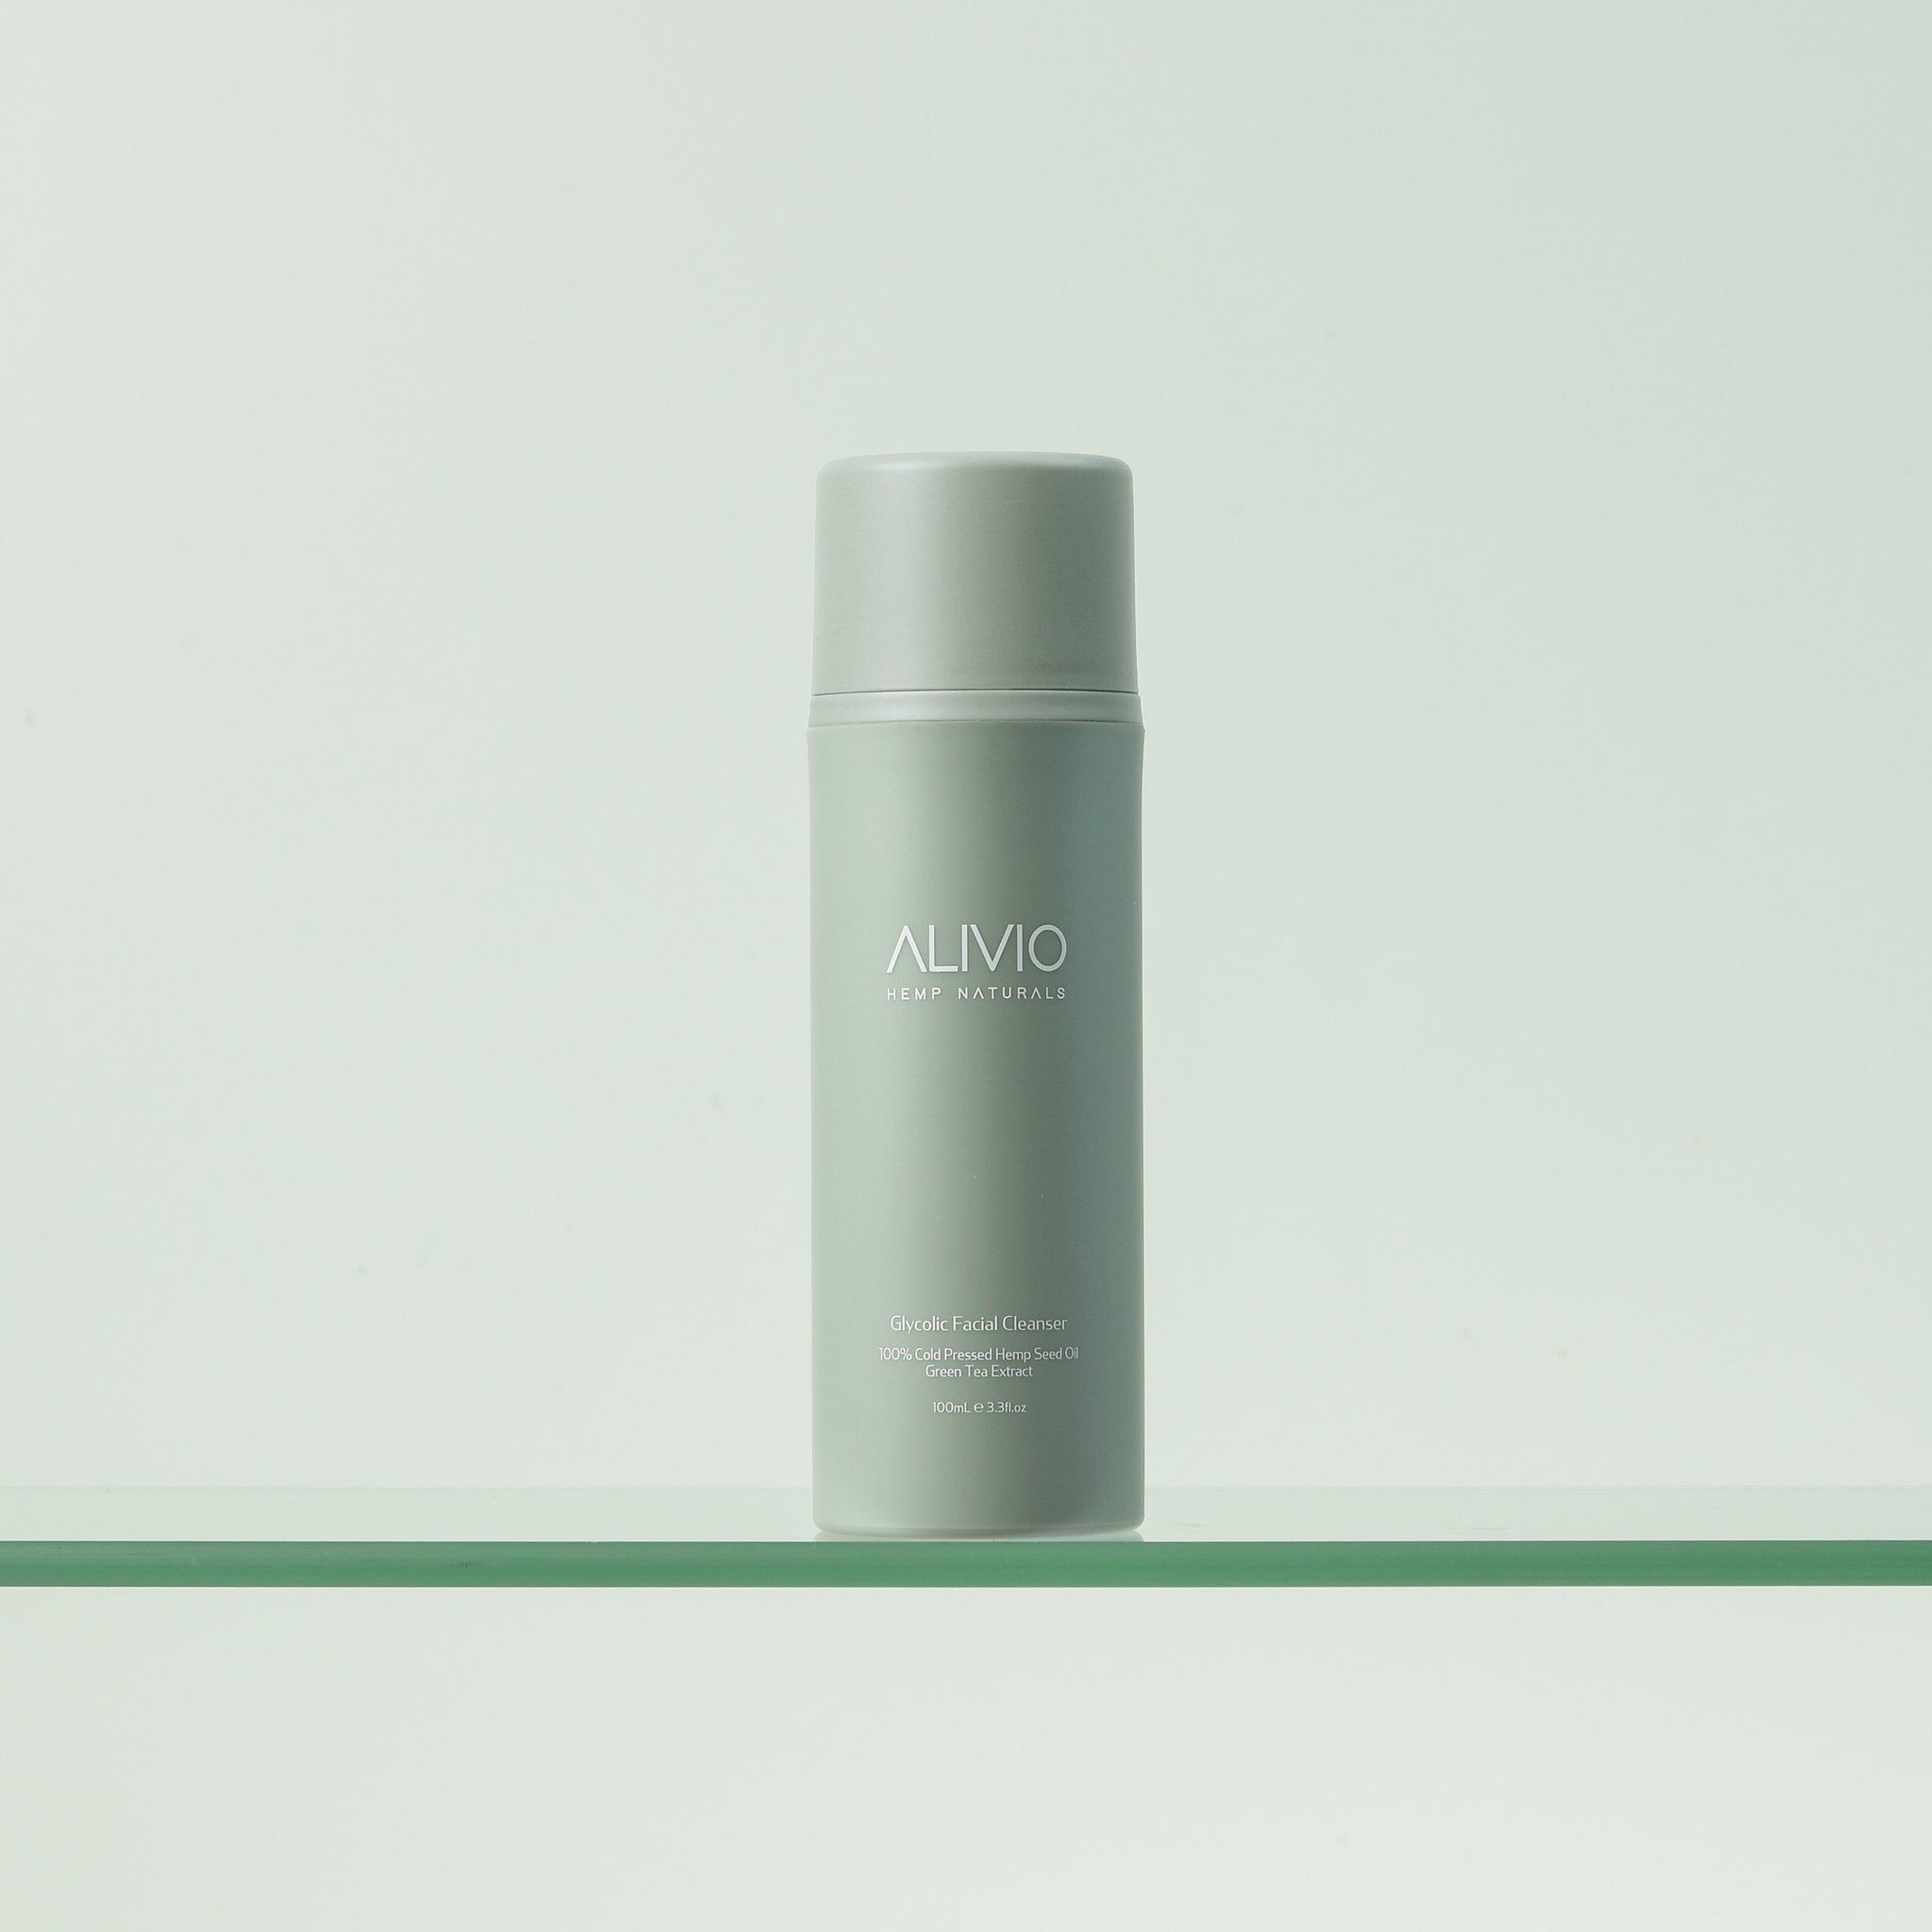 Alivio Wellness Glycolic Facial Cleanser bottle for gentle exfoliation and a brighter complexion.